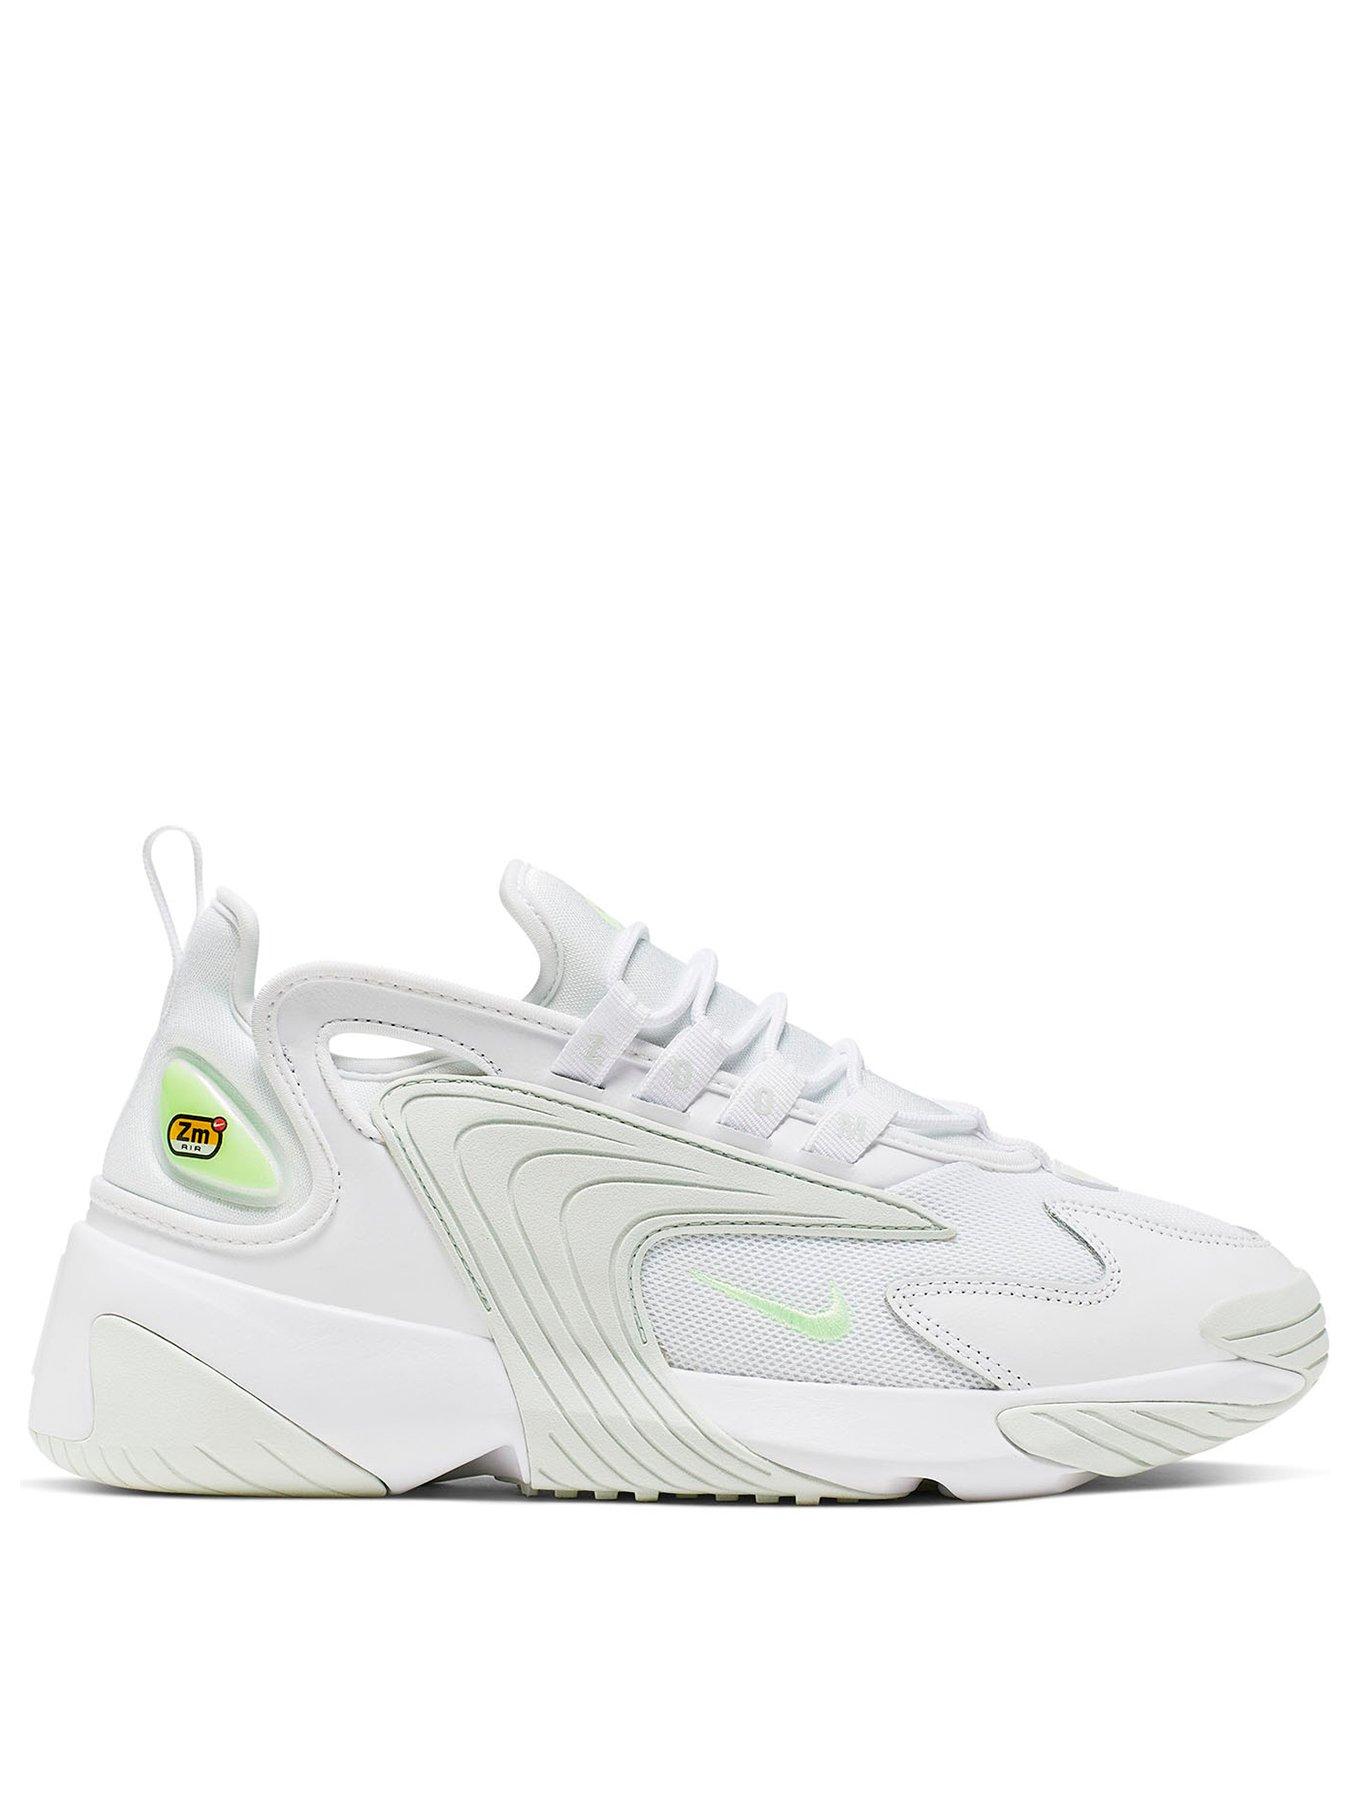 zoom 2k white and green